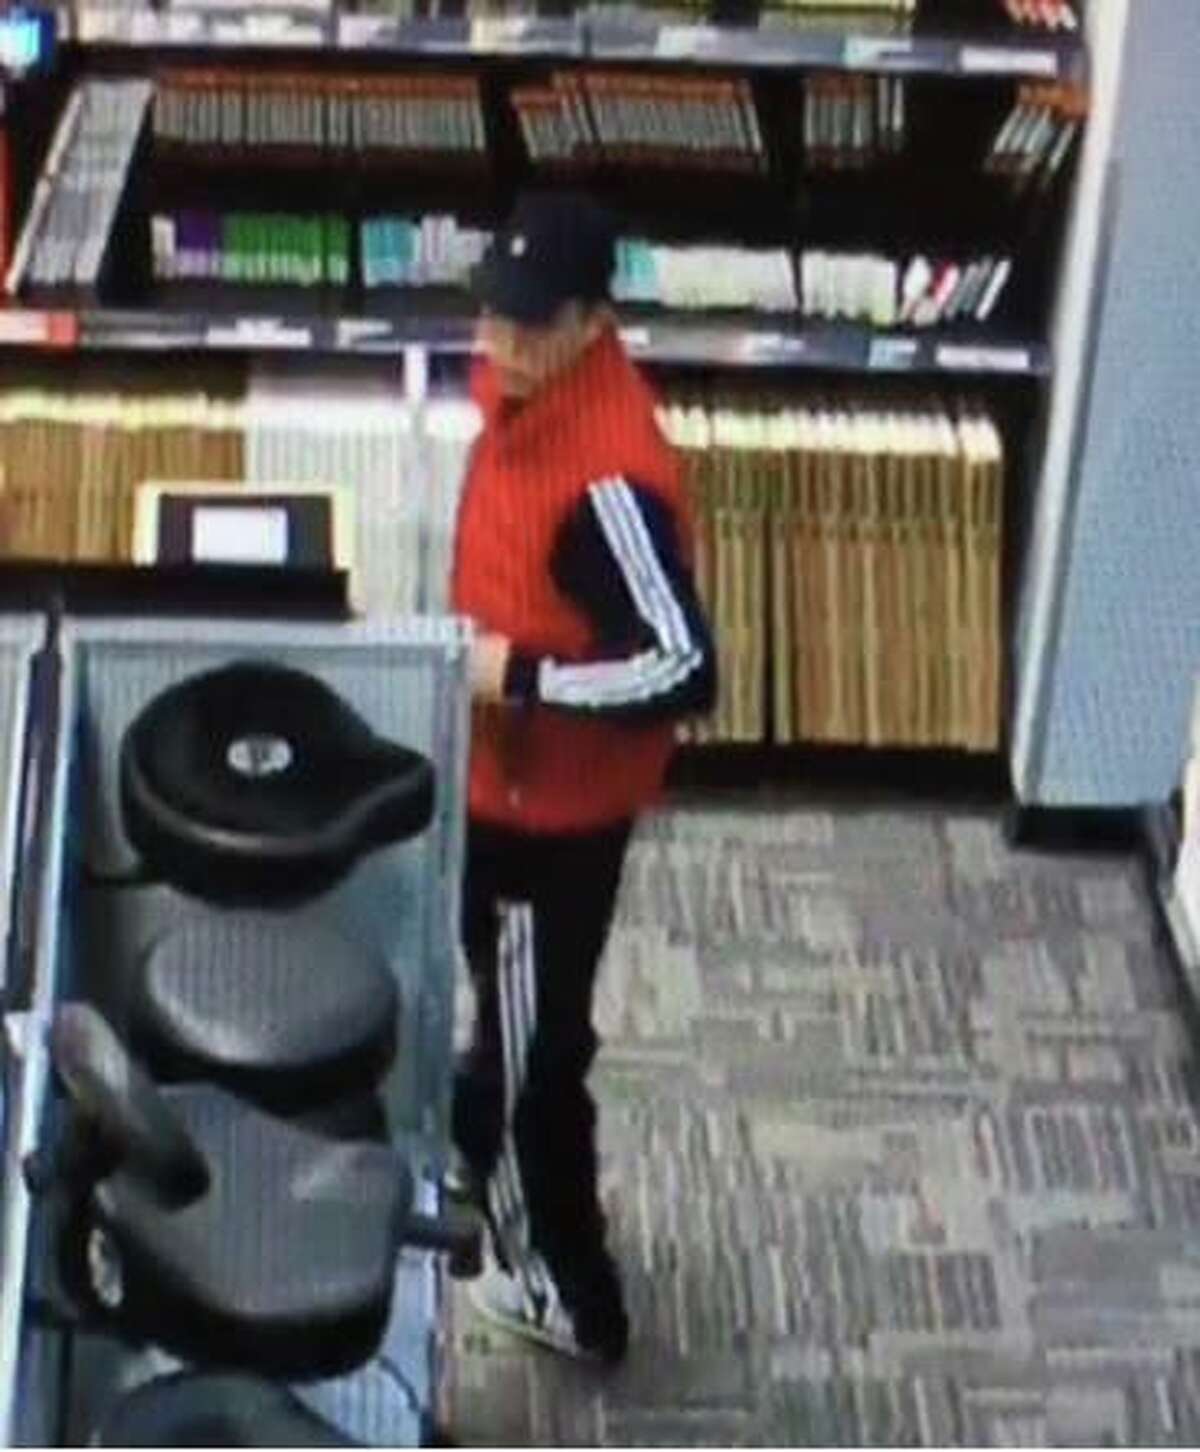 The Fort Worth Police Department is looking for a suspect who was caught on surveillance footage shoving a guitar in his pants and leaving the a Guitar Center on Jan. 18, 2017.